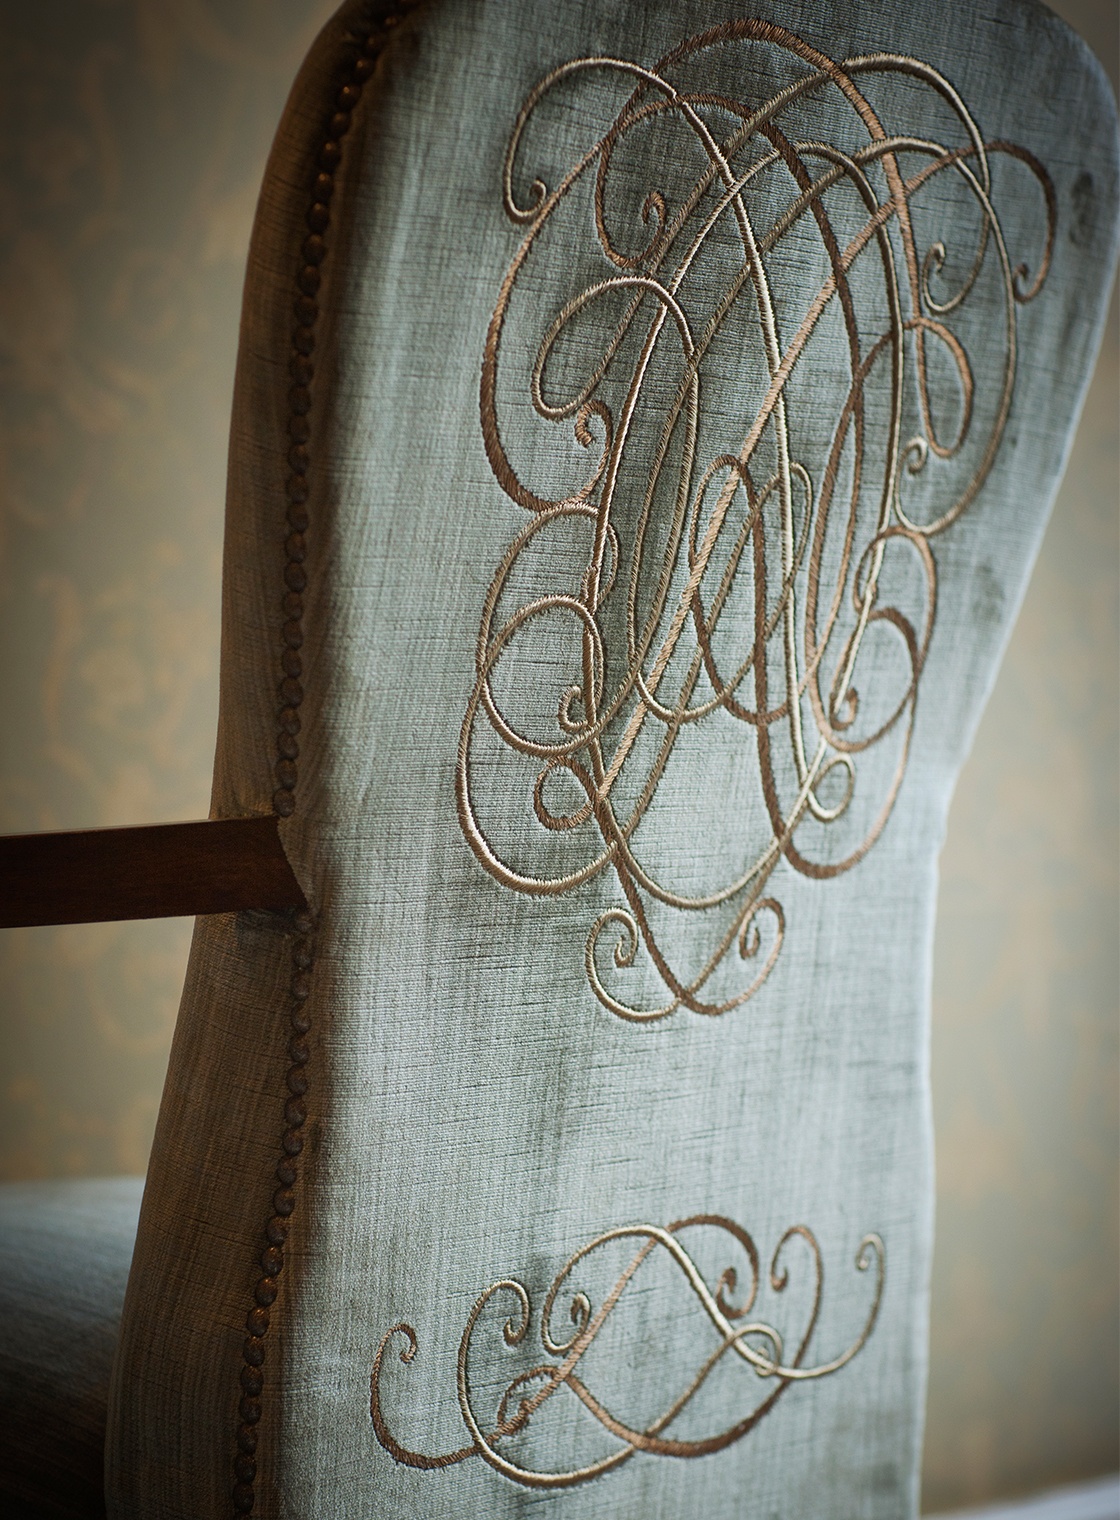 Blake dining chair in Como silk velvet - Moss with Anastasia embroidery - Beaumont & Fletcher